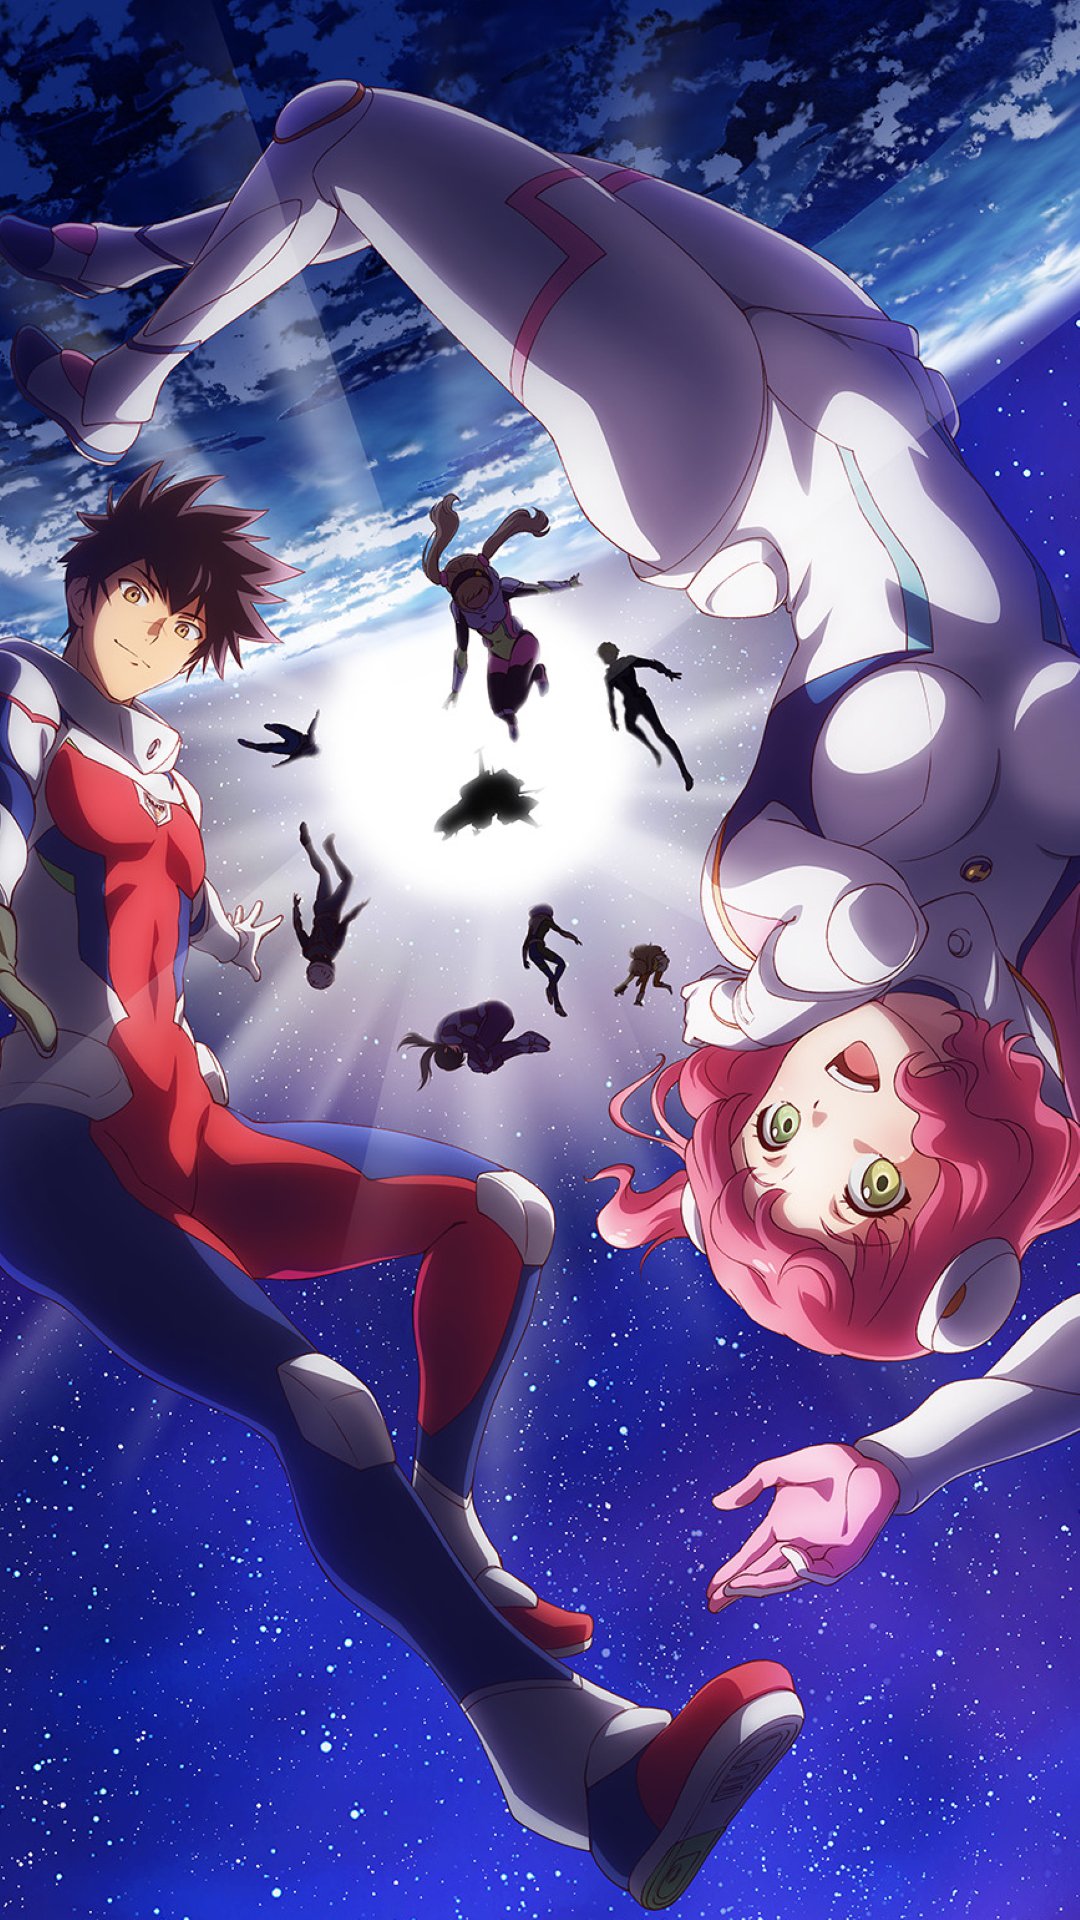 Kanata no Astra (Astra Lost in Space